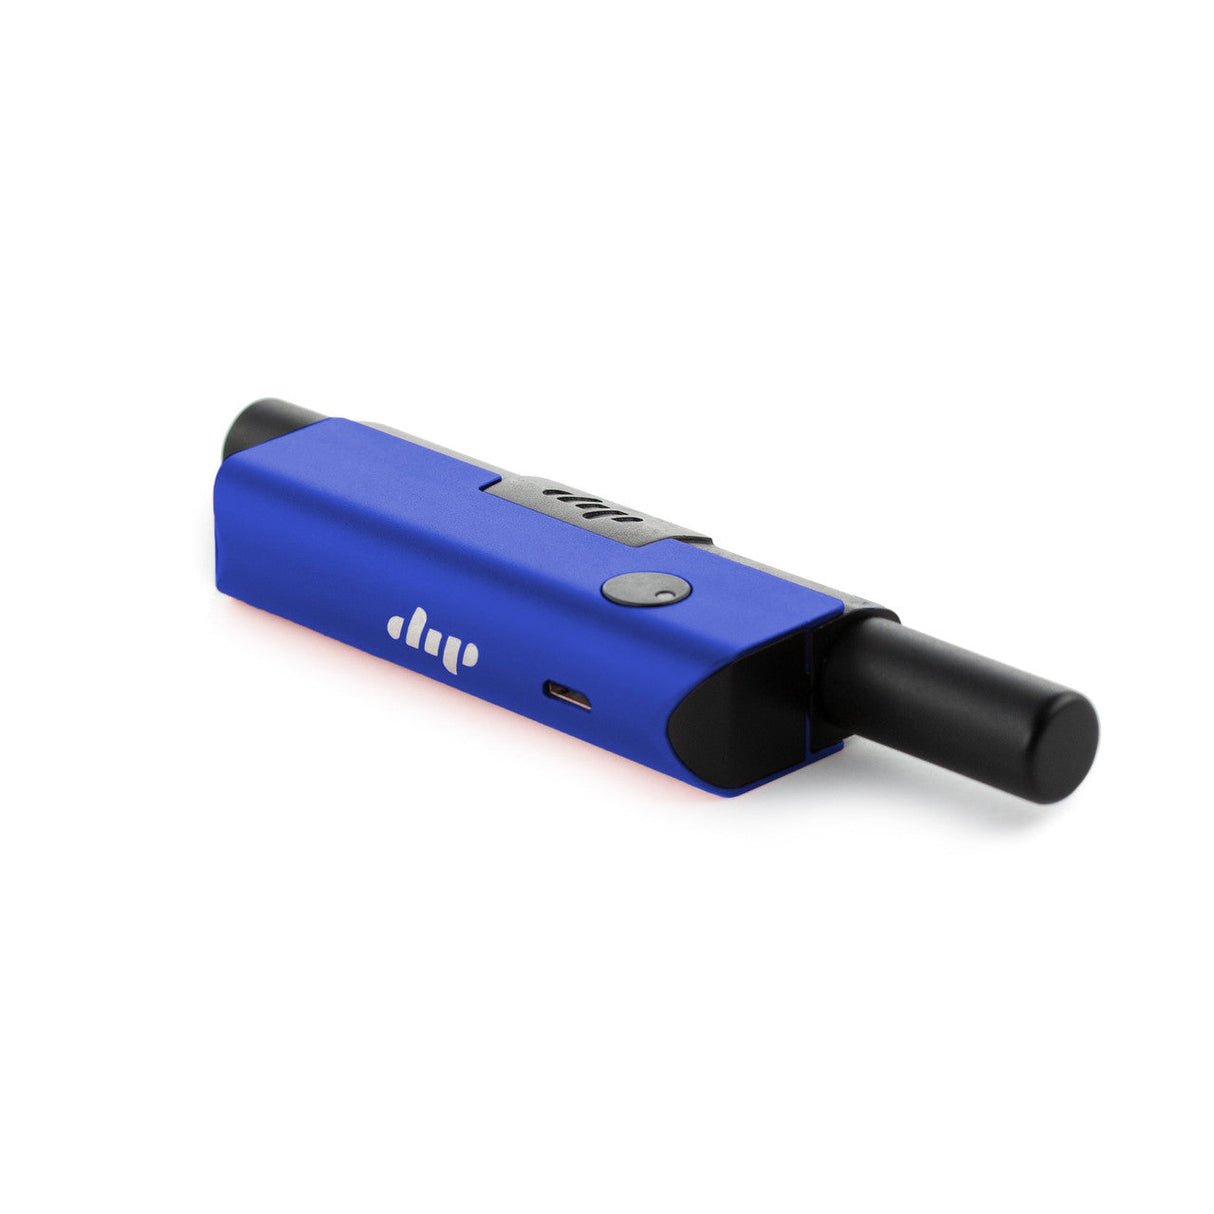 Dip Devices Evri Starter Kit in blue, portable battery-powered vaporizer for concentrates, side view